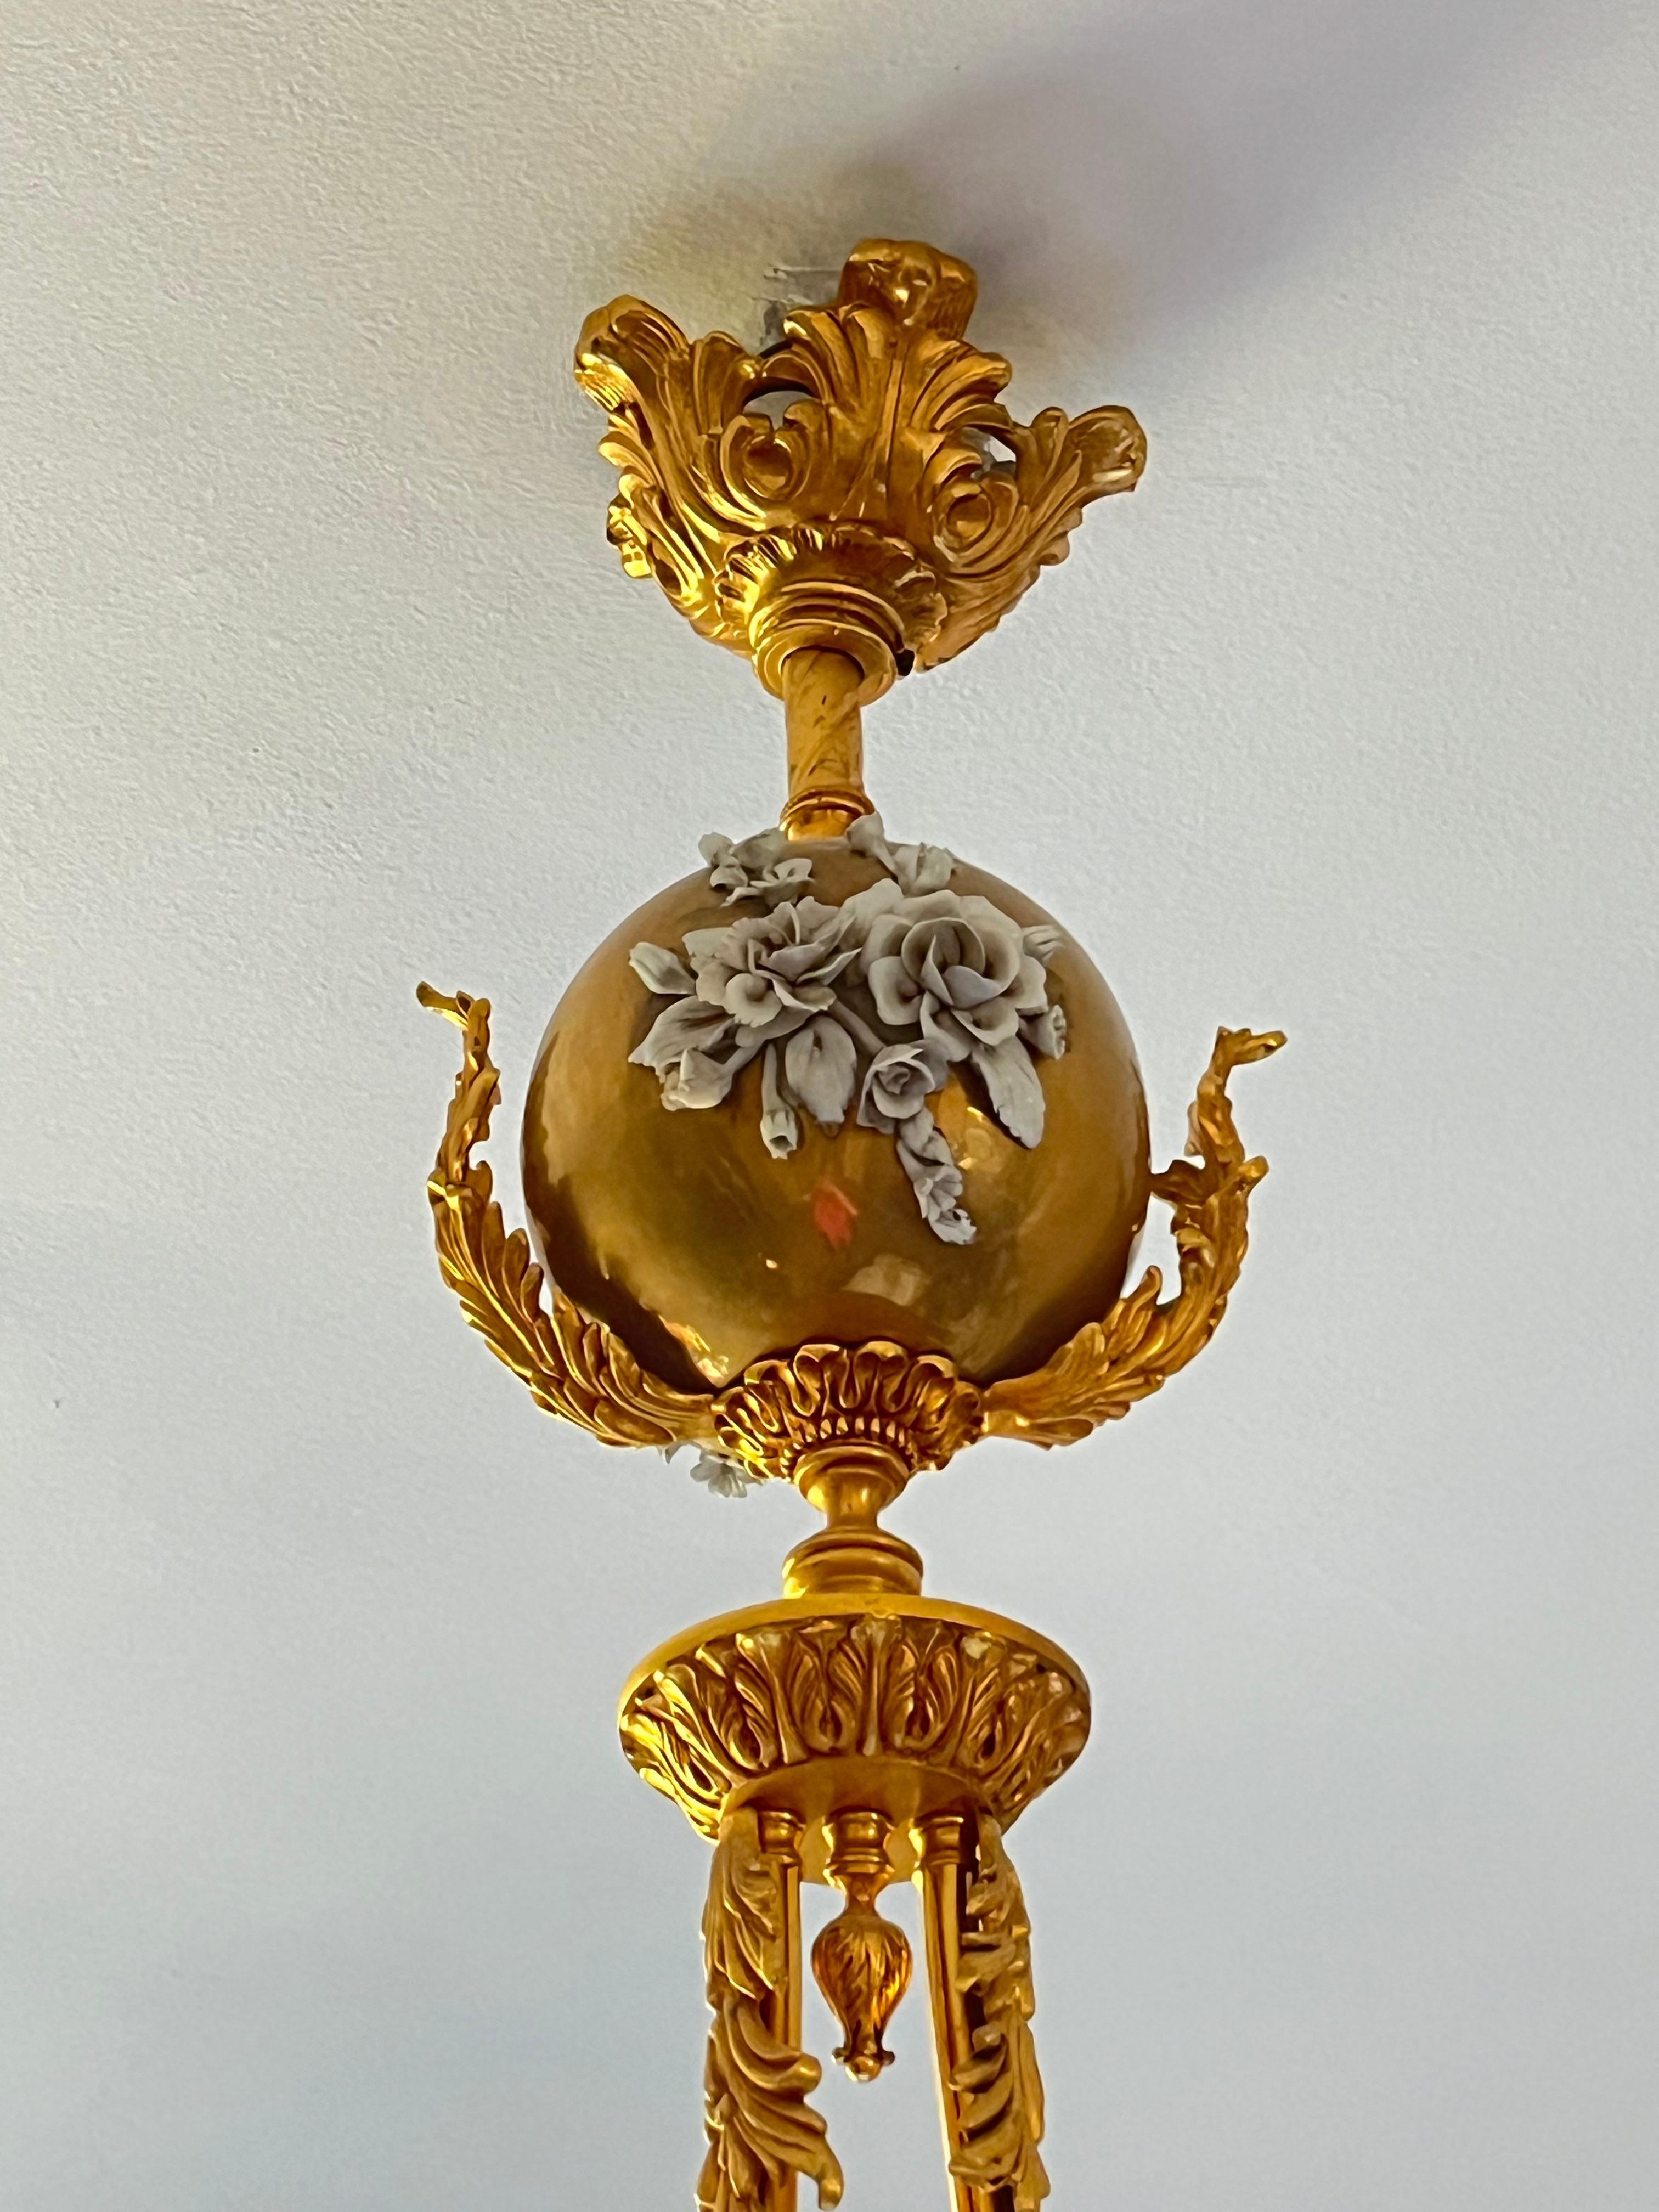 Large two-light brass and porcelain chandelier, Italy, 1980s
Functioning and intact, found in a noble apartment. Built to a design by the former owner. A work of art. Very small signs of the time.